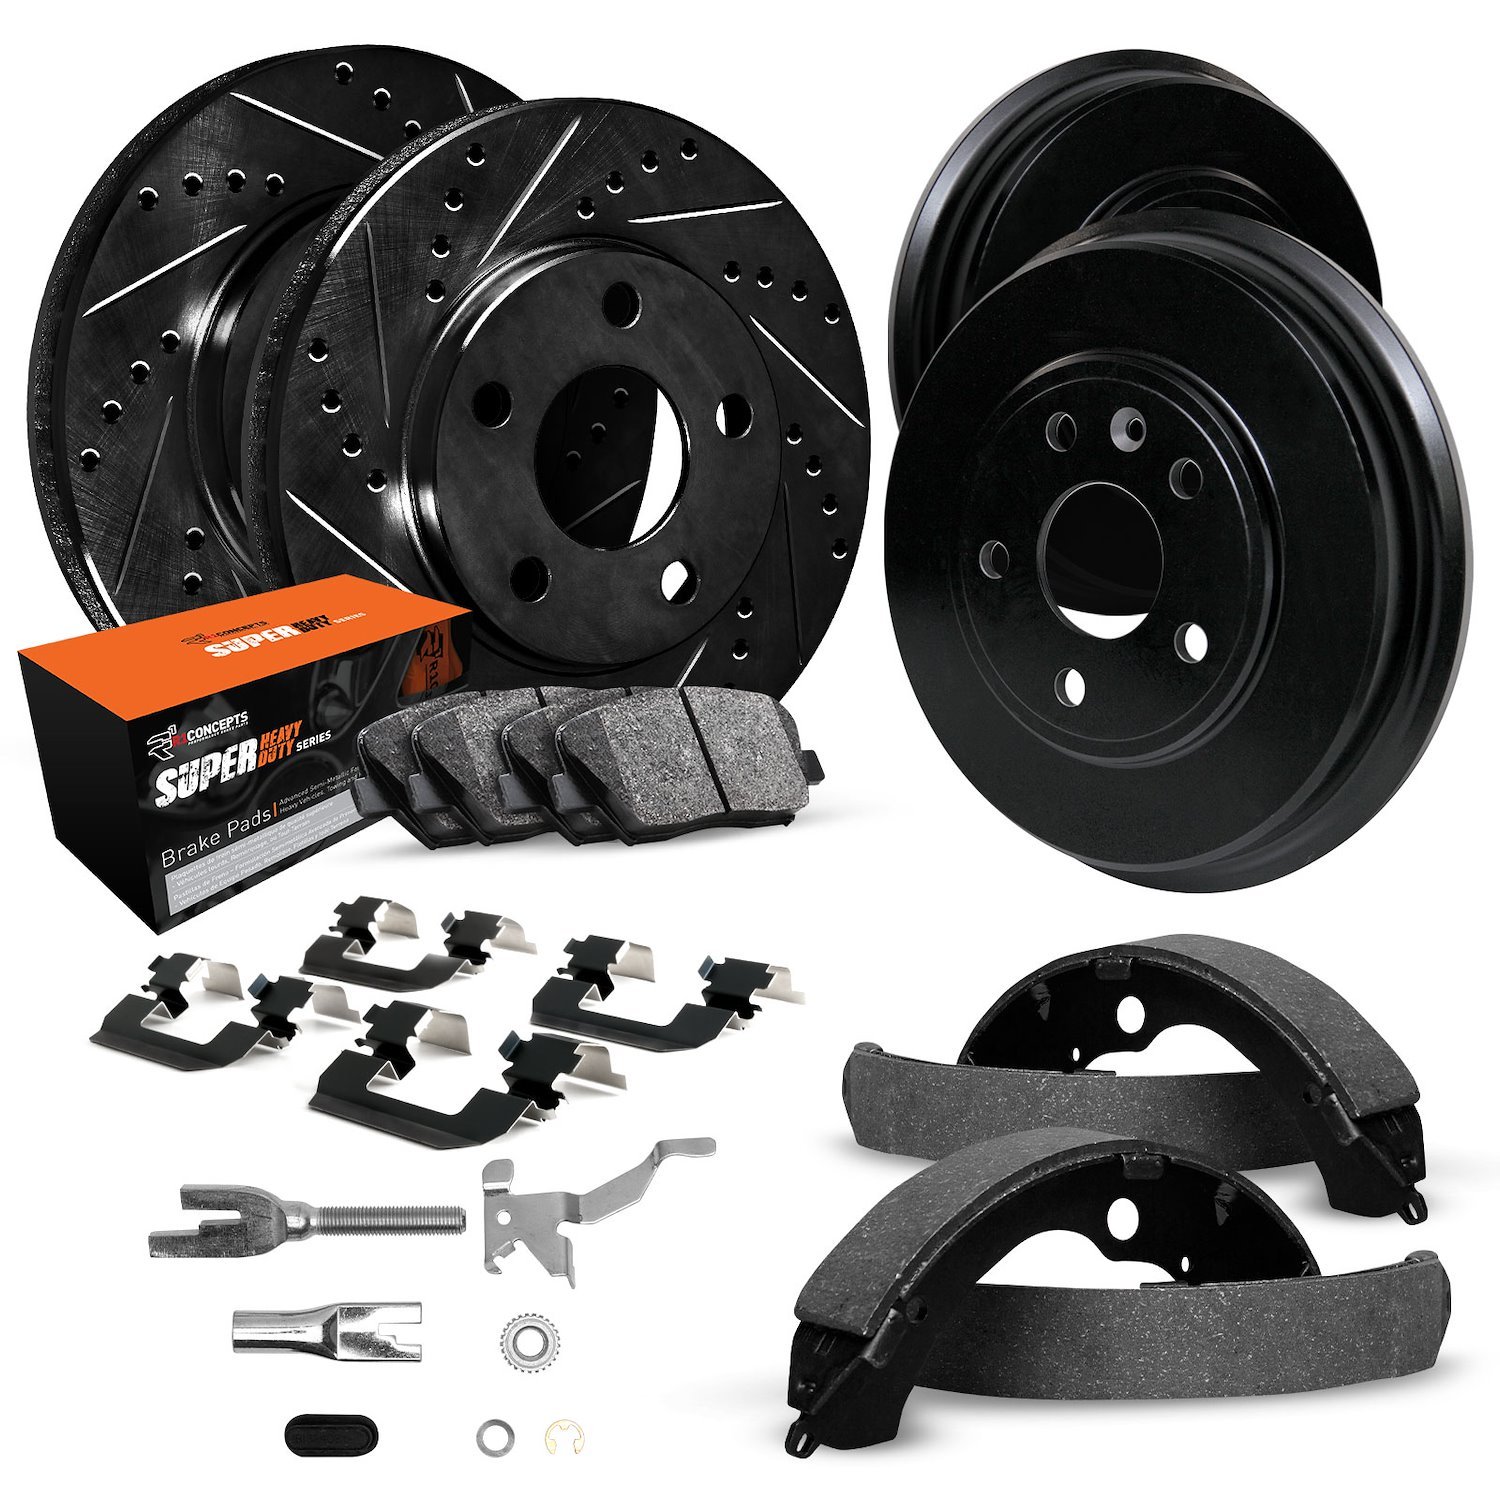 E-Line Slotted Black Brake Rotor & Drum Set w/Super-Duty Pads, Shoes, Hardware/Adjusters, 1997-1999 Ford/Lincoln/Mercury/Mazda